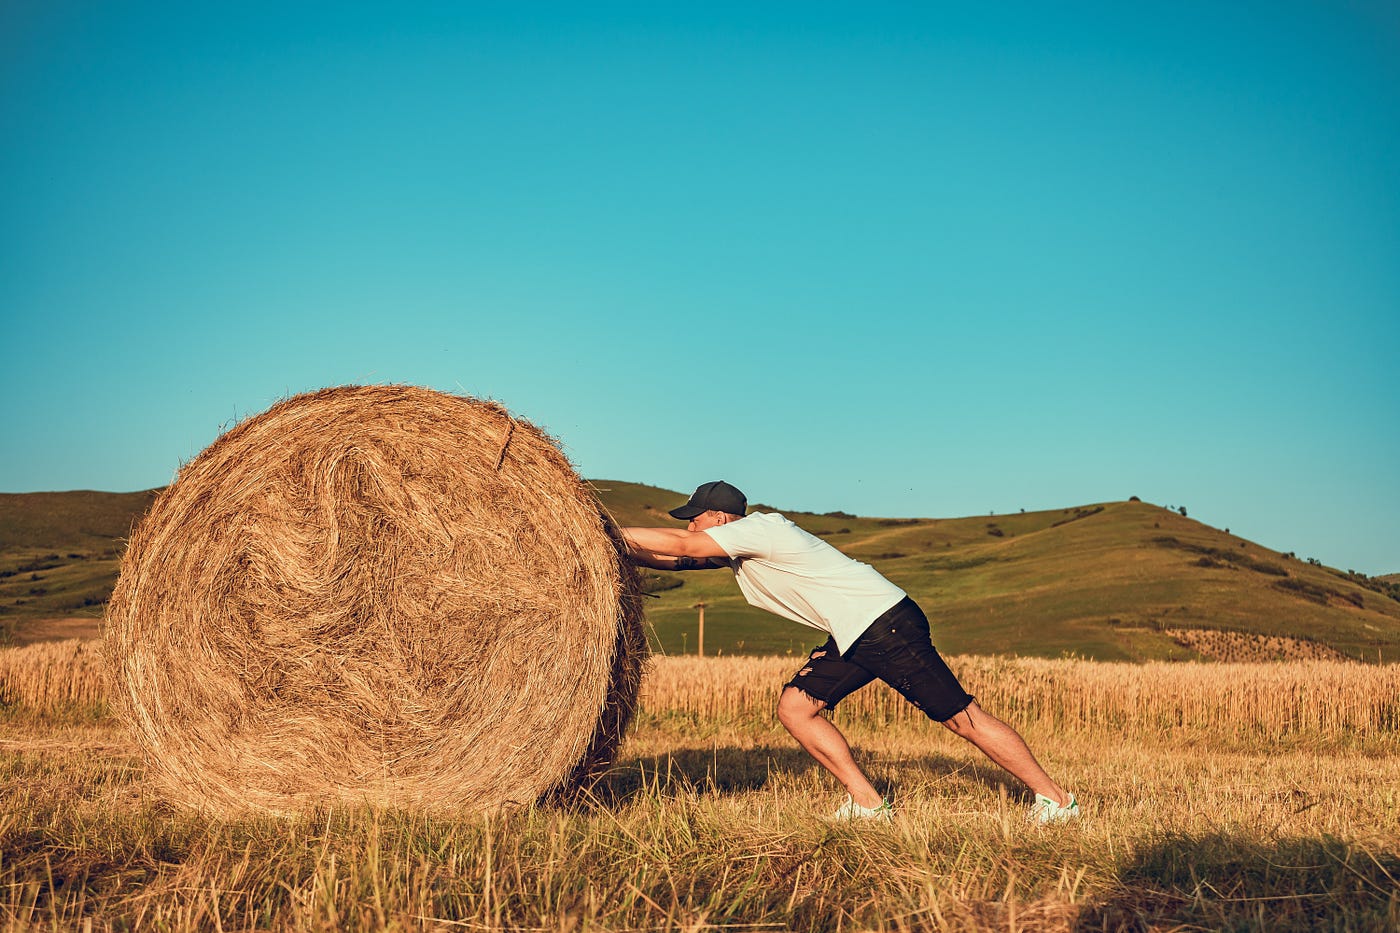 A man pushes a heavy looking hay bale in a golden field with hills and a blue sky in the background